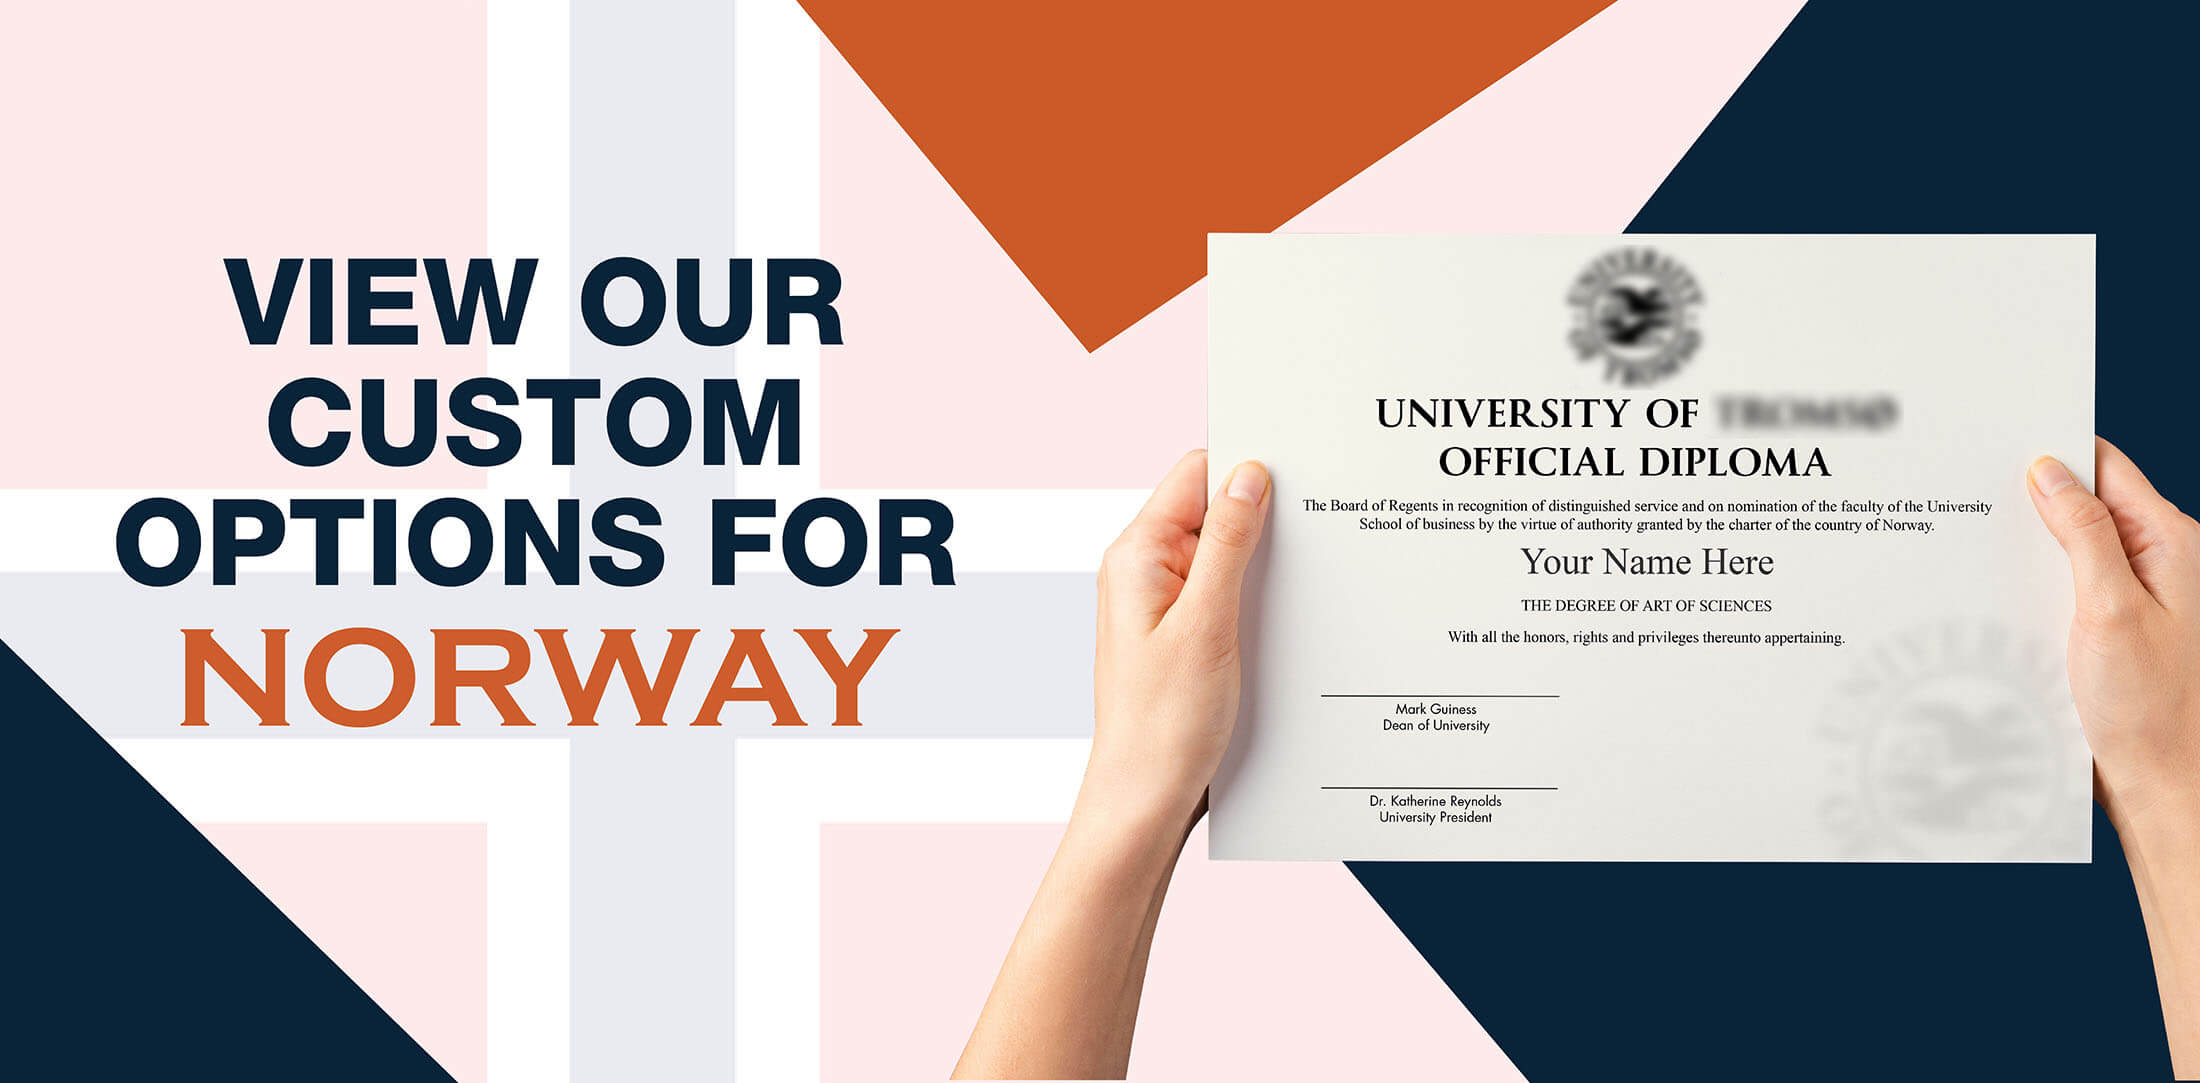 Buy Fake College Diplomas, Transcripts and Degrees from Norway